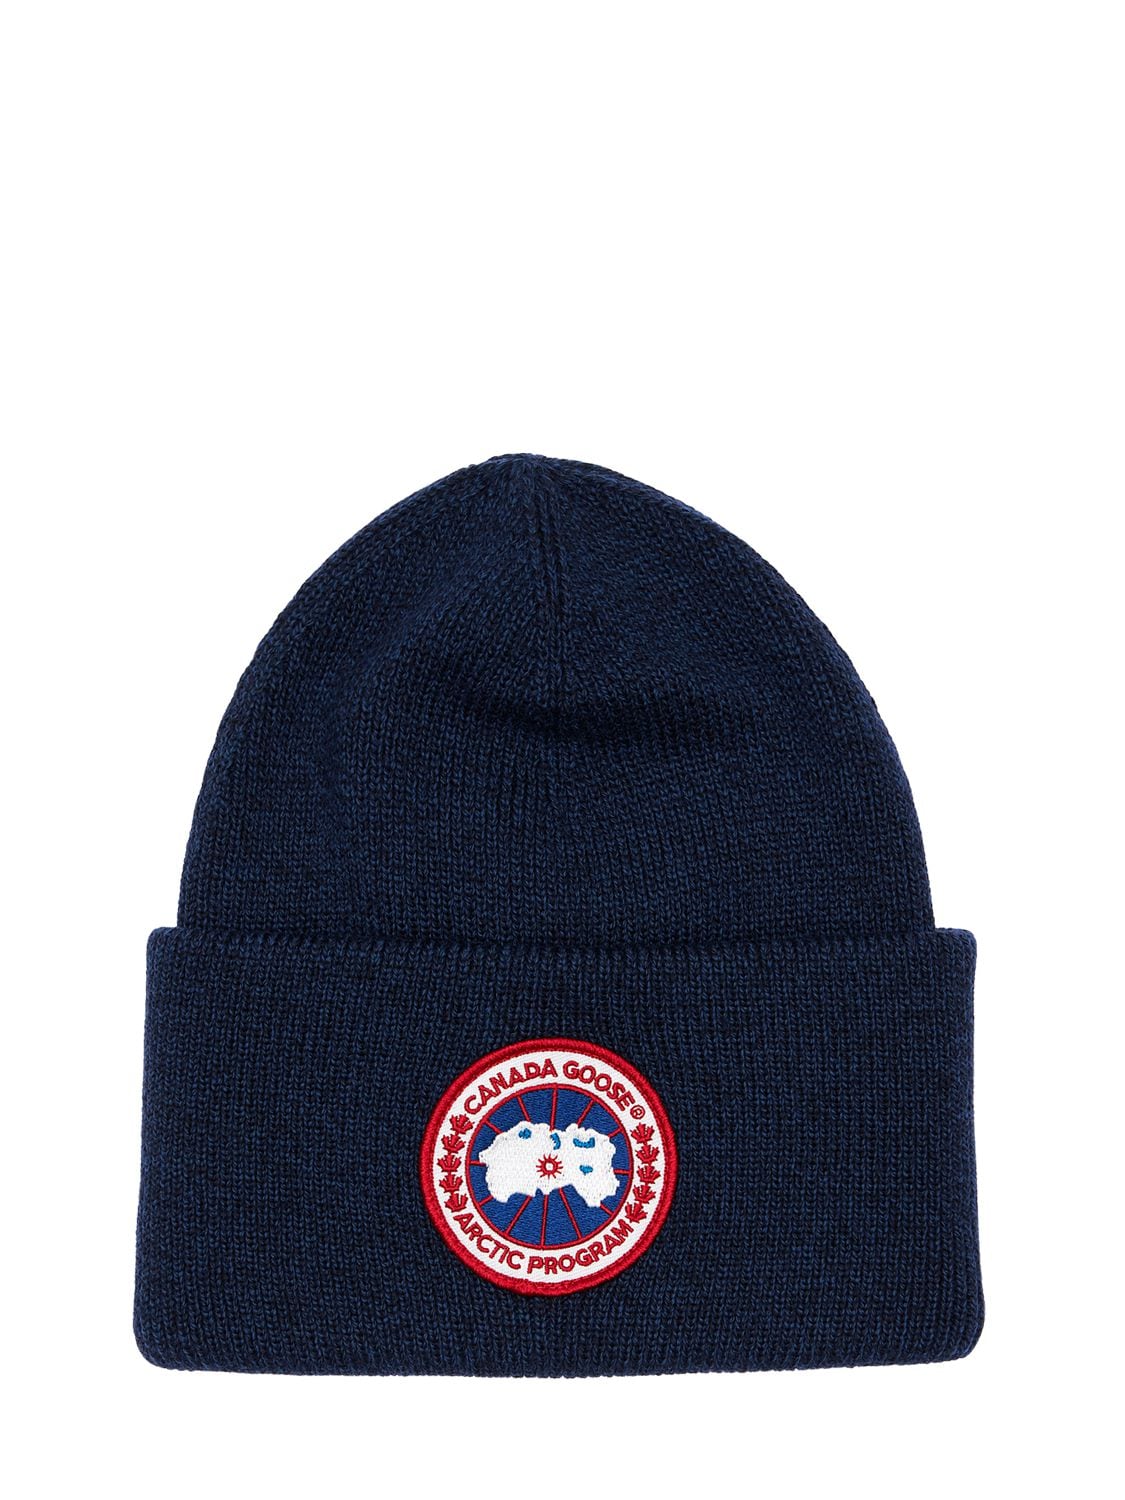 Canada Goose Arctic Disc Toque Wool Knit Beanie Hat In Navy